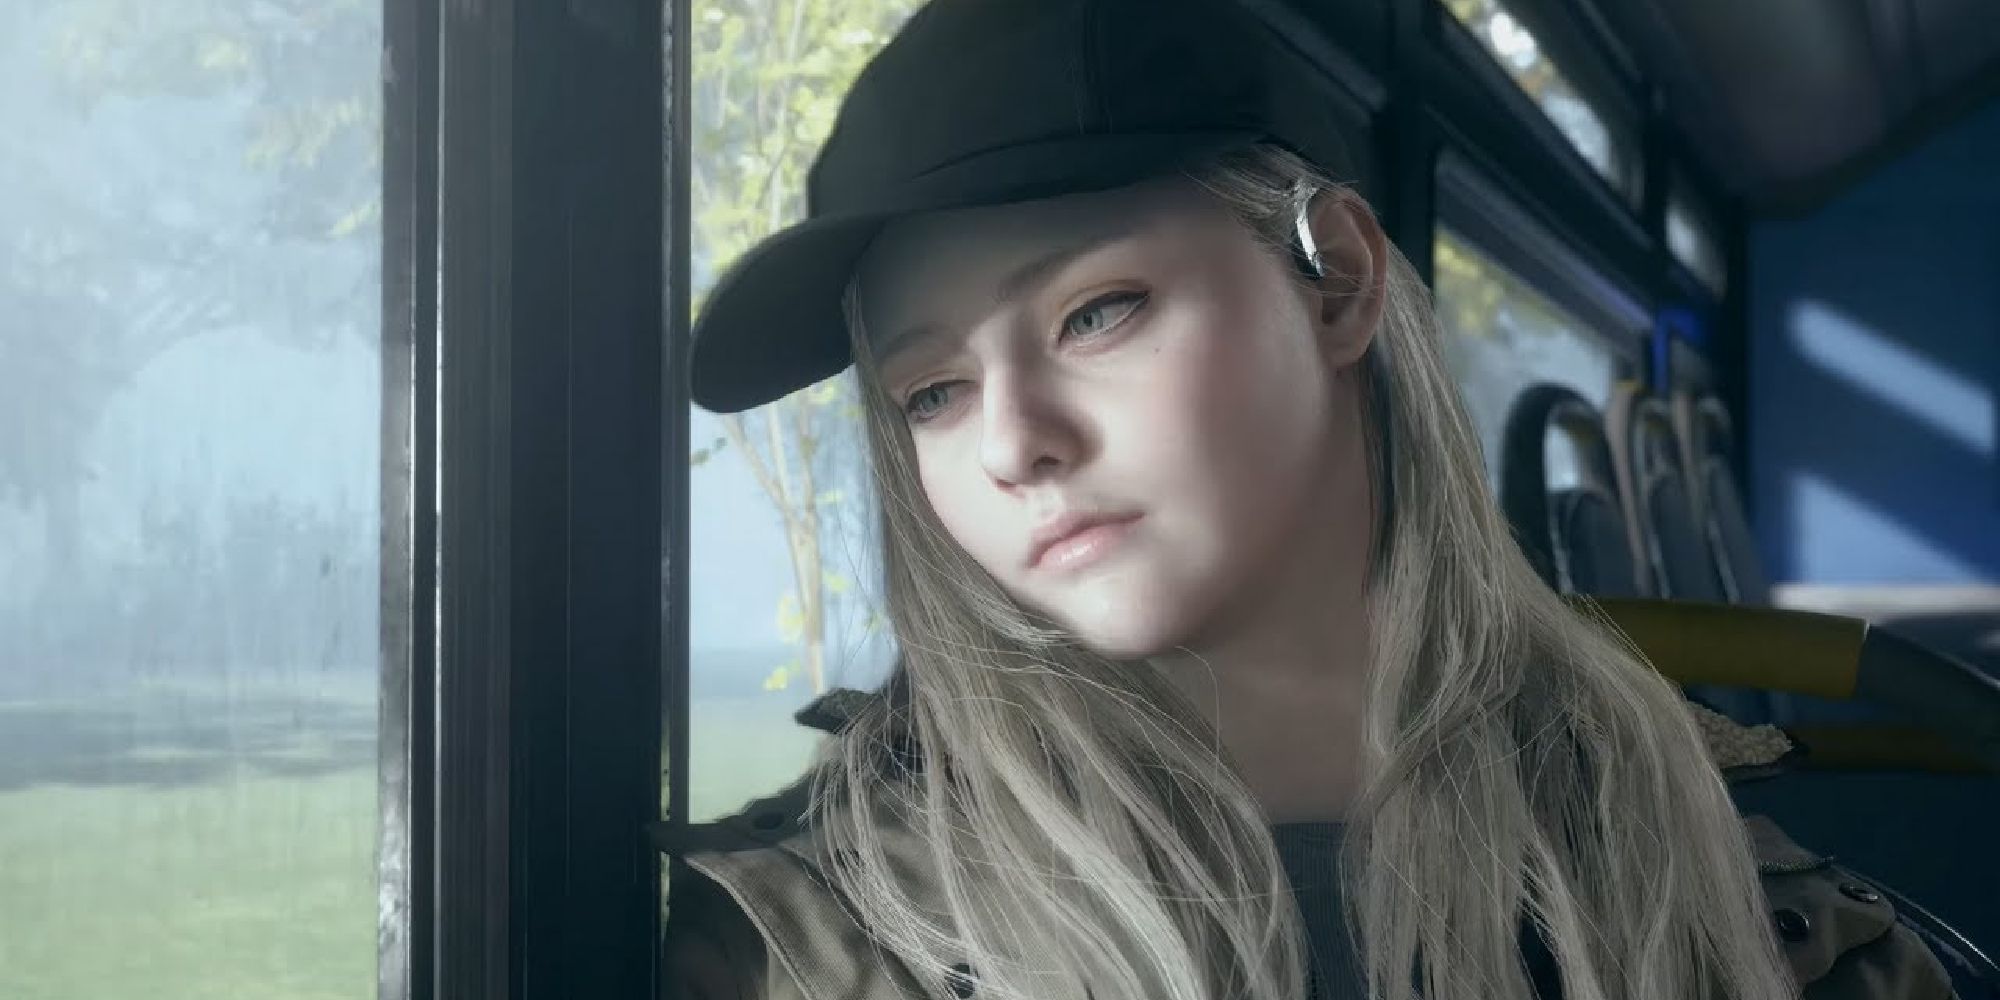 A teenaged Rosemary looking out the window of a bus with a morose expression in Resident Evil Village